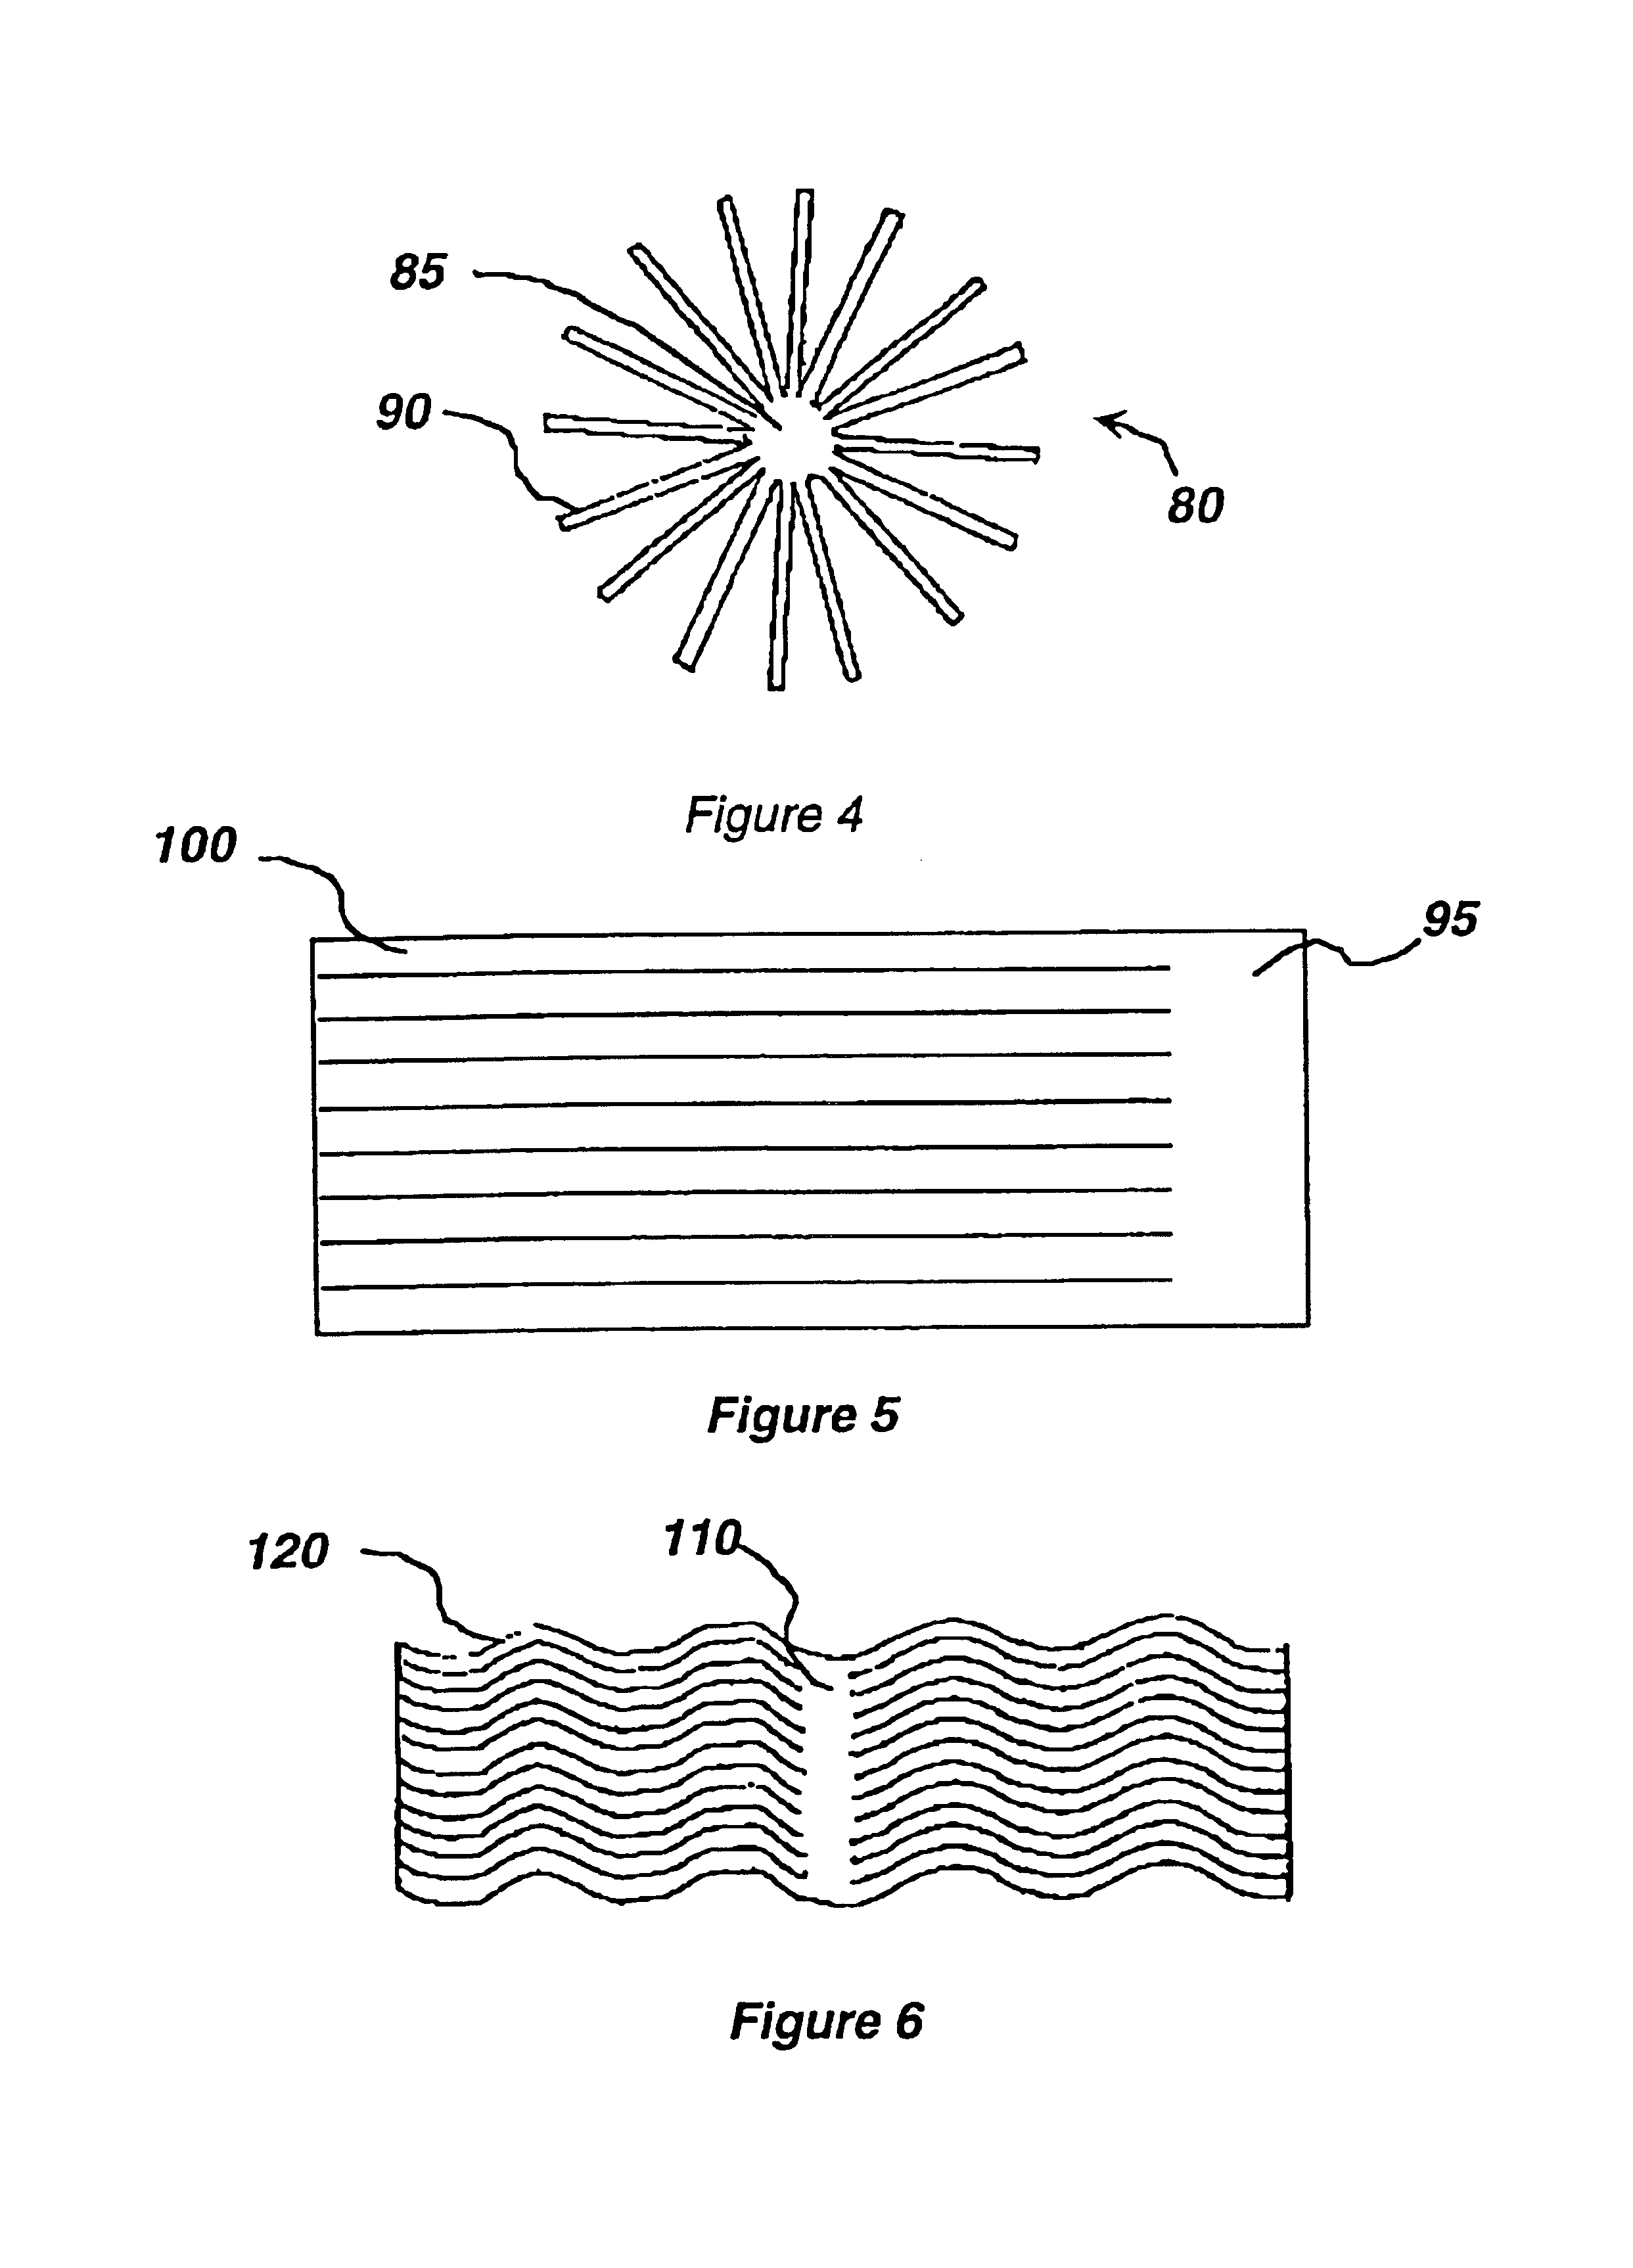 Silver-containing compositions, devices and methods for making